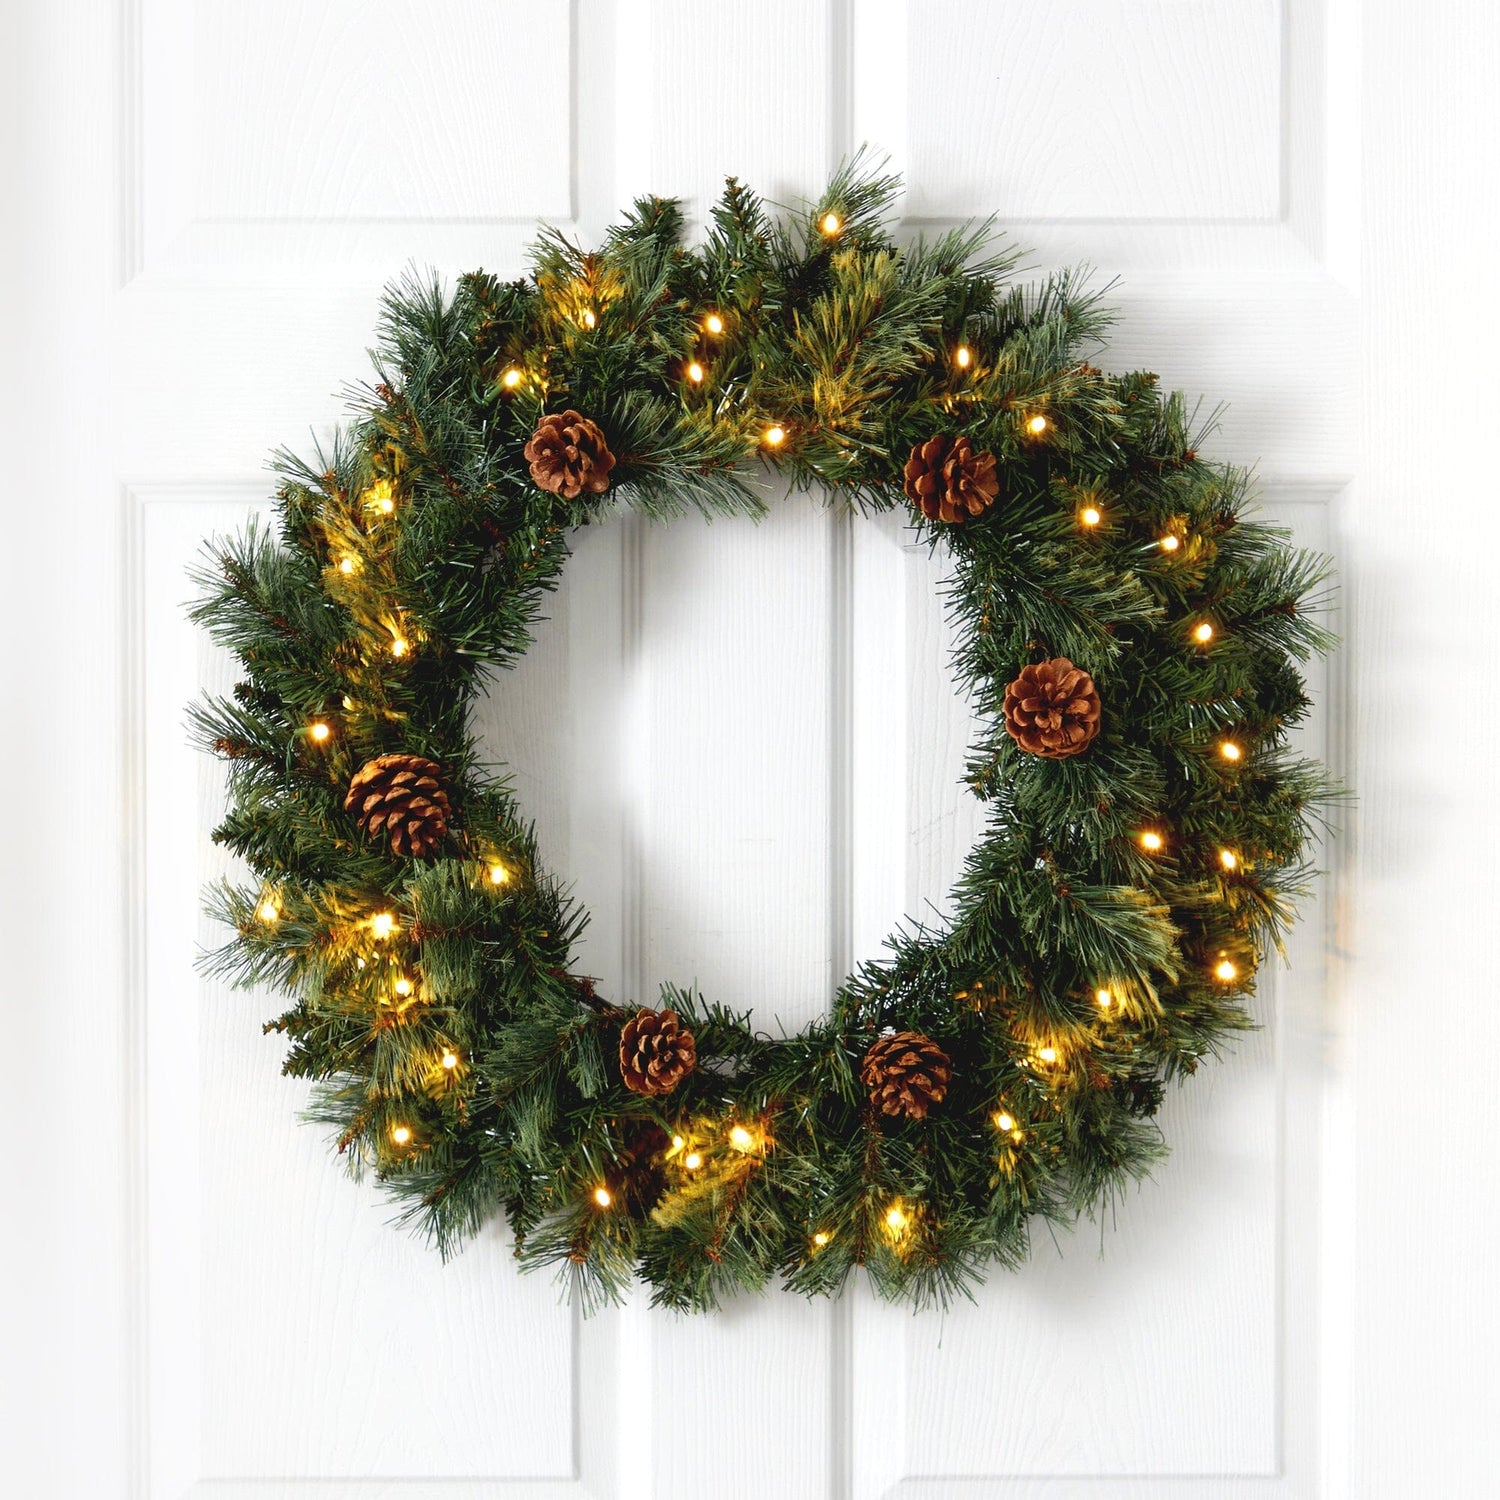 24” White Mountain Pine Artificial Christmas Wreath with 35 LED Lights and Pinecones